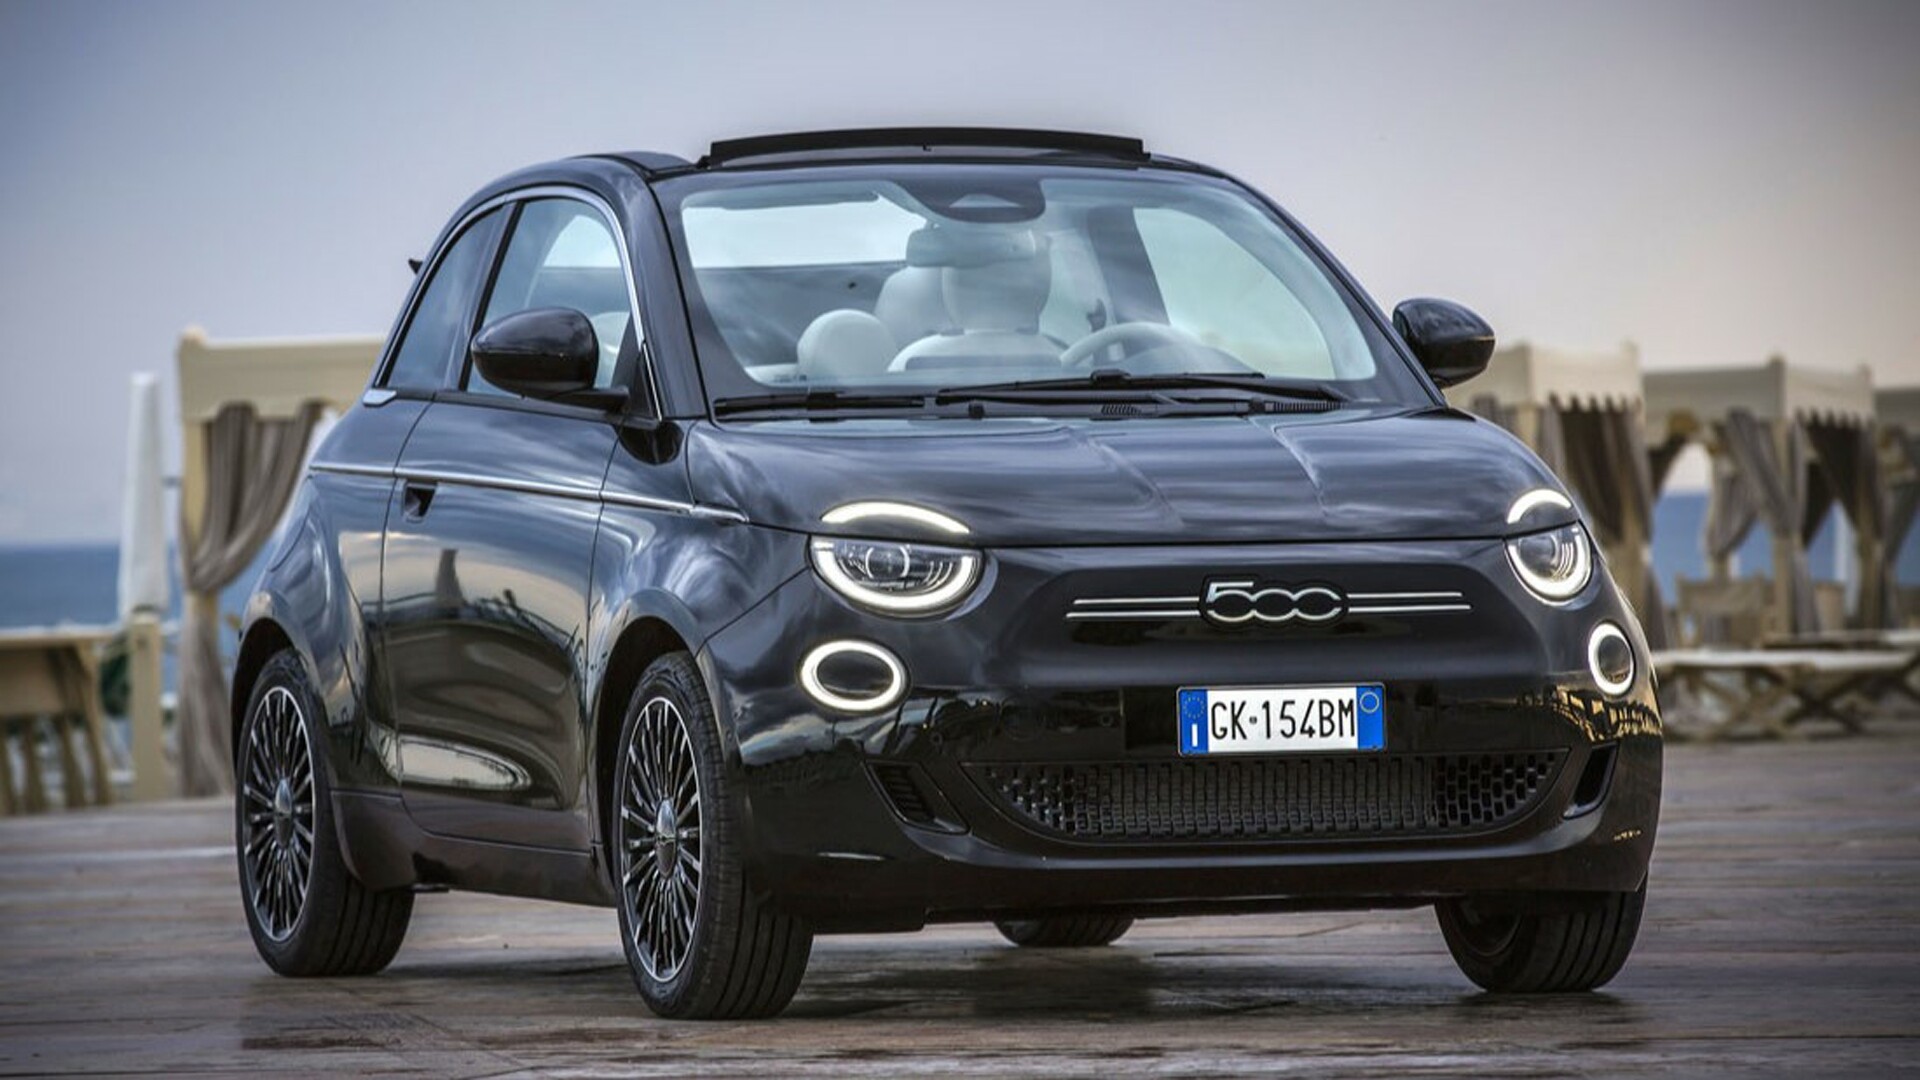 The Fiat 500e Inspired By Music Version (Credits: Fiat)